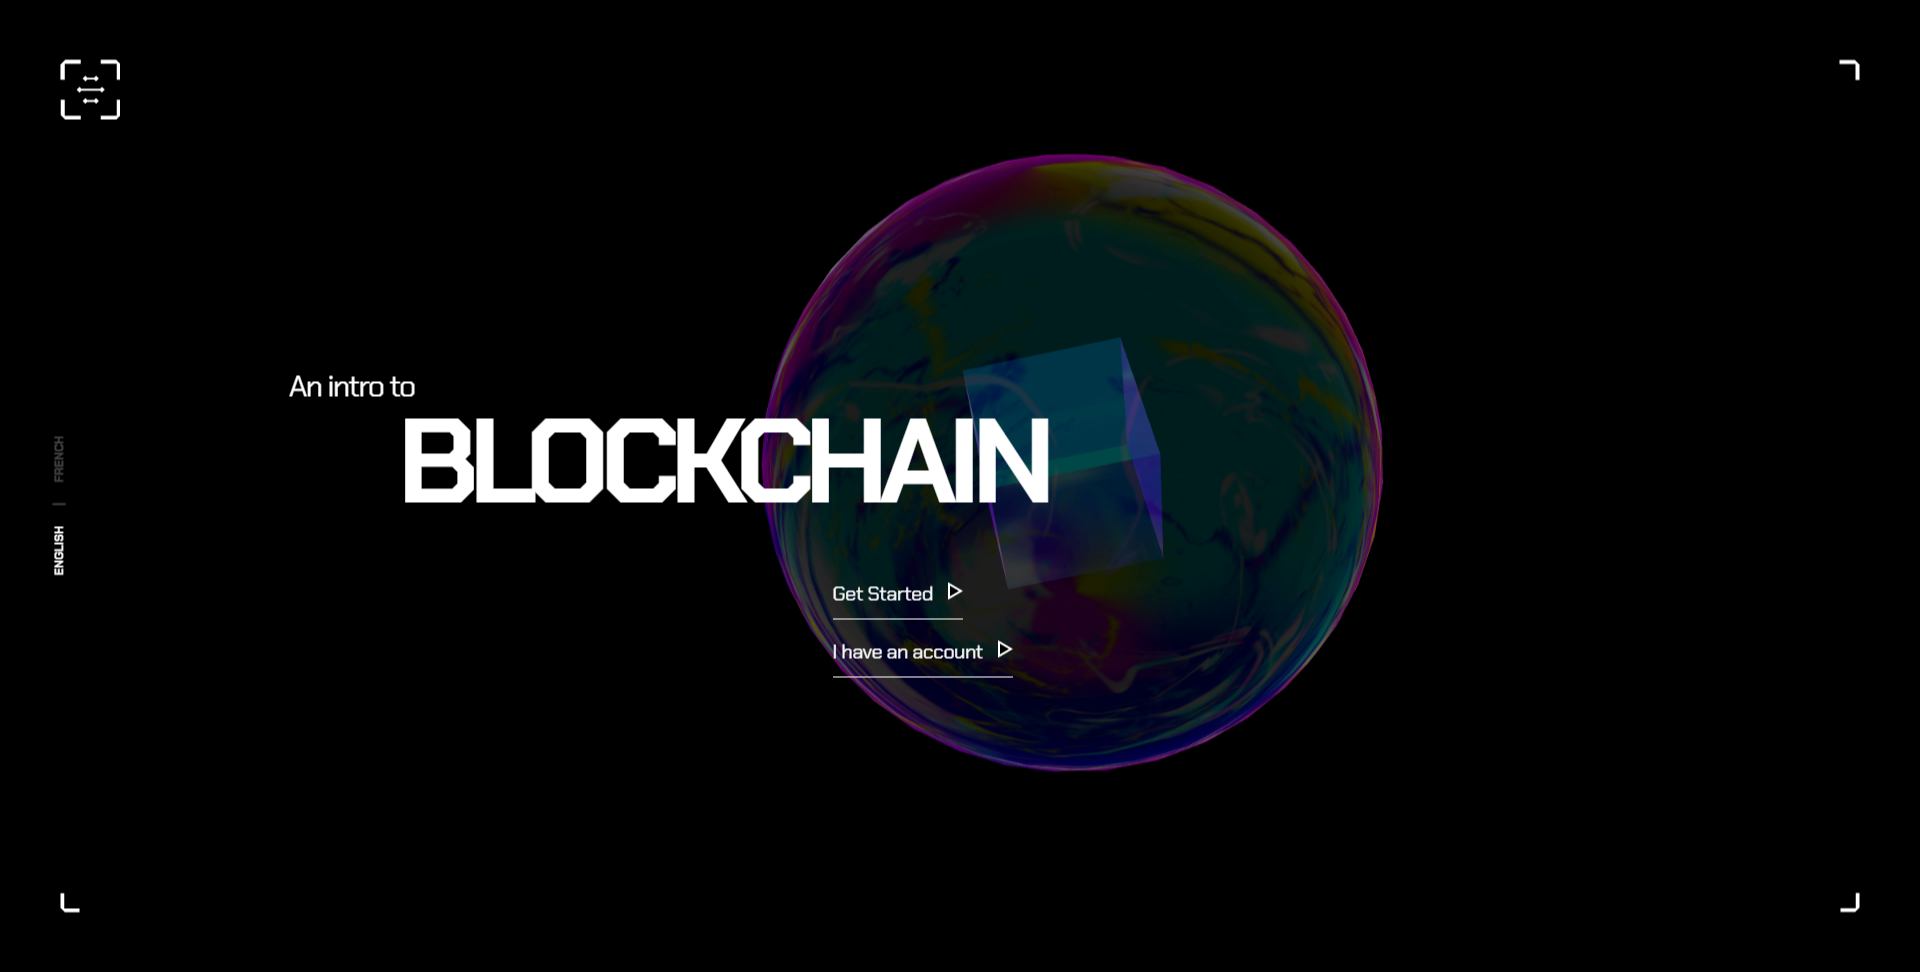 An abstract illustration for the home page of the "An intro to Blockchain" website